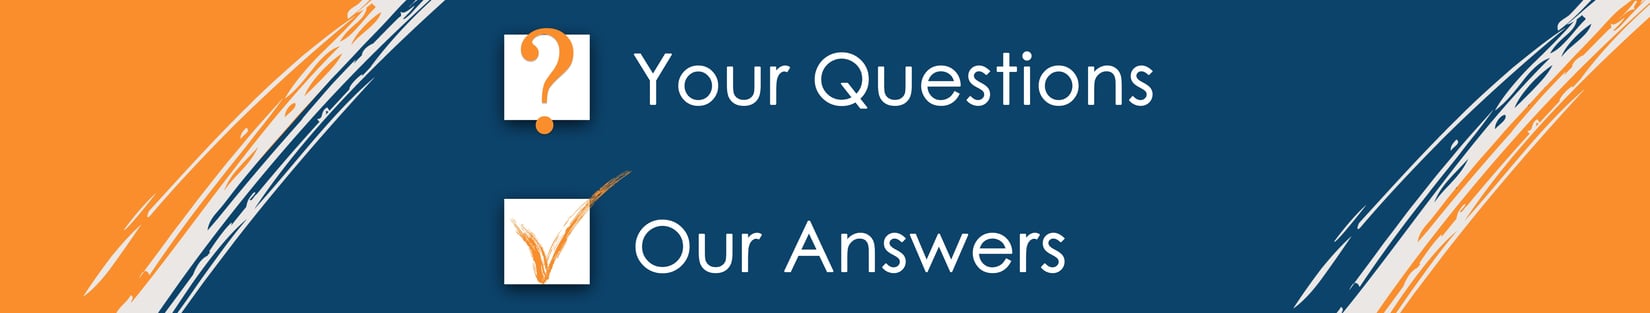 your questions, our answers banner (2)